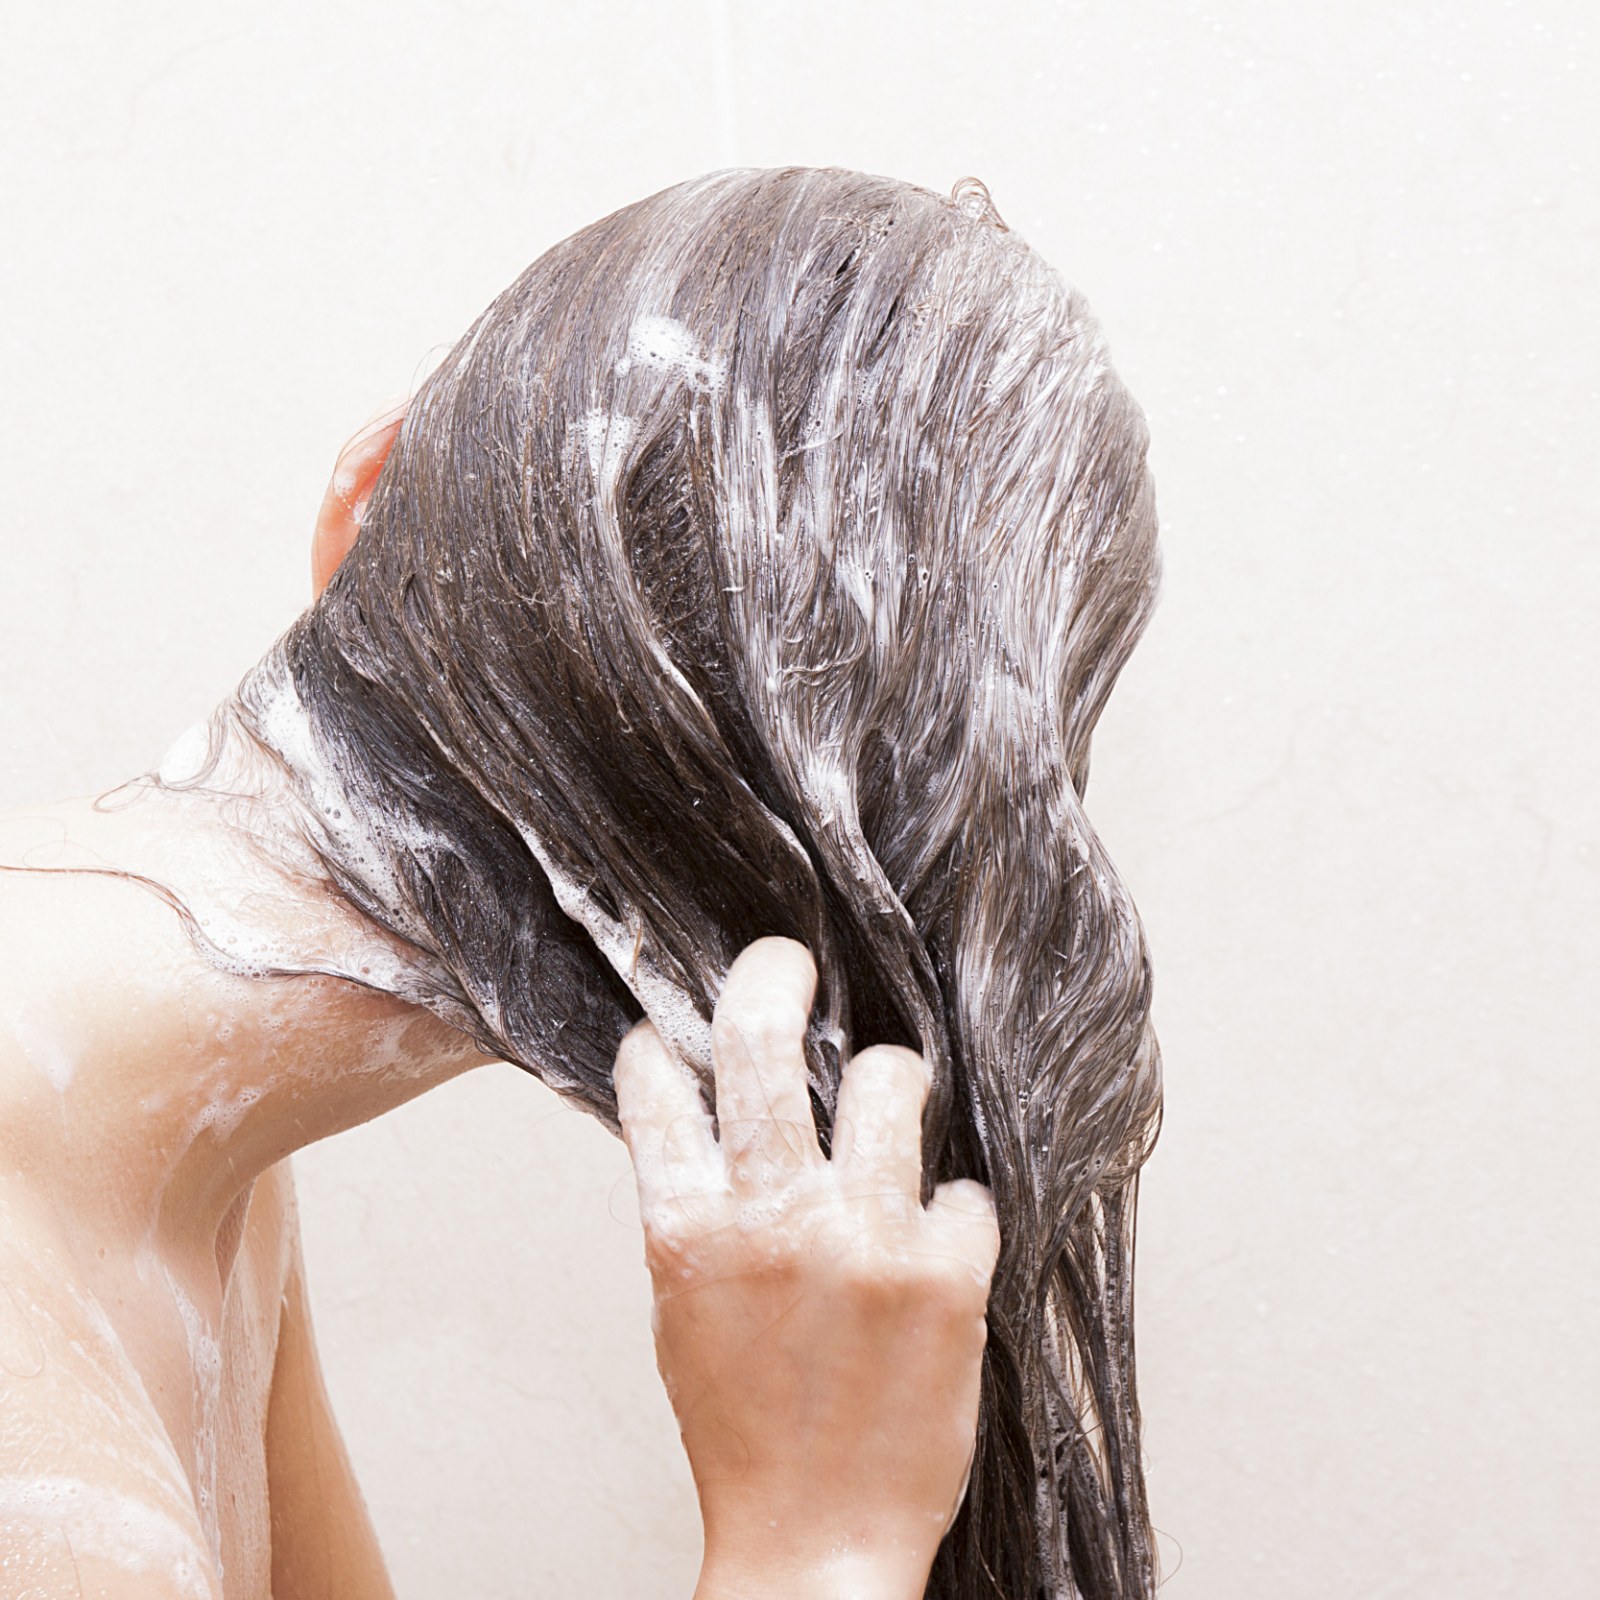 These shower tips will make your hair smooth and soft – OASIS: